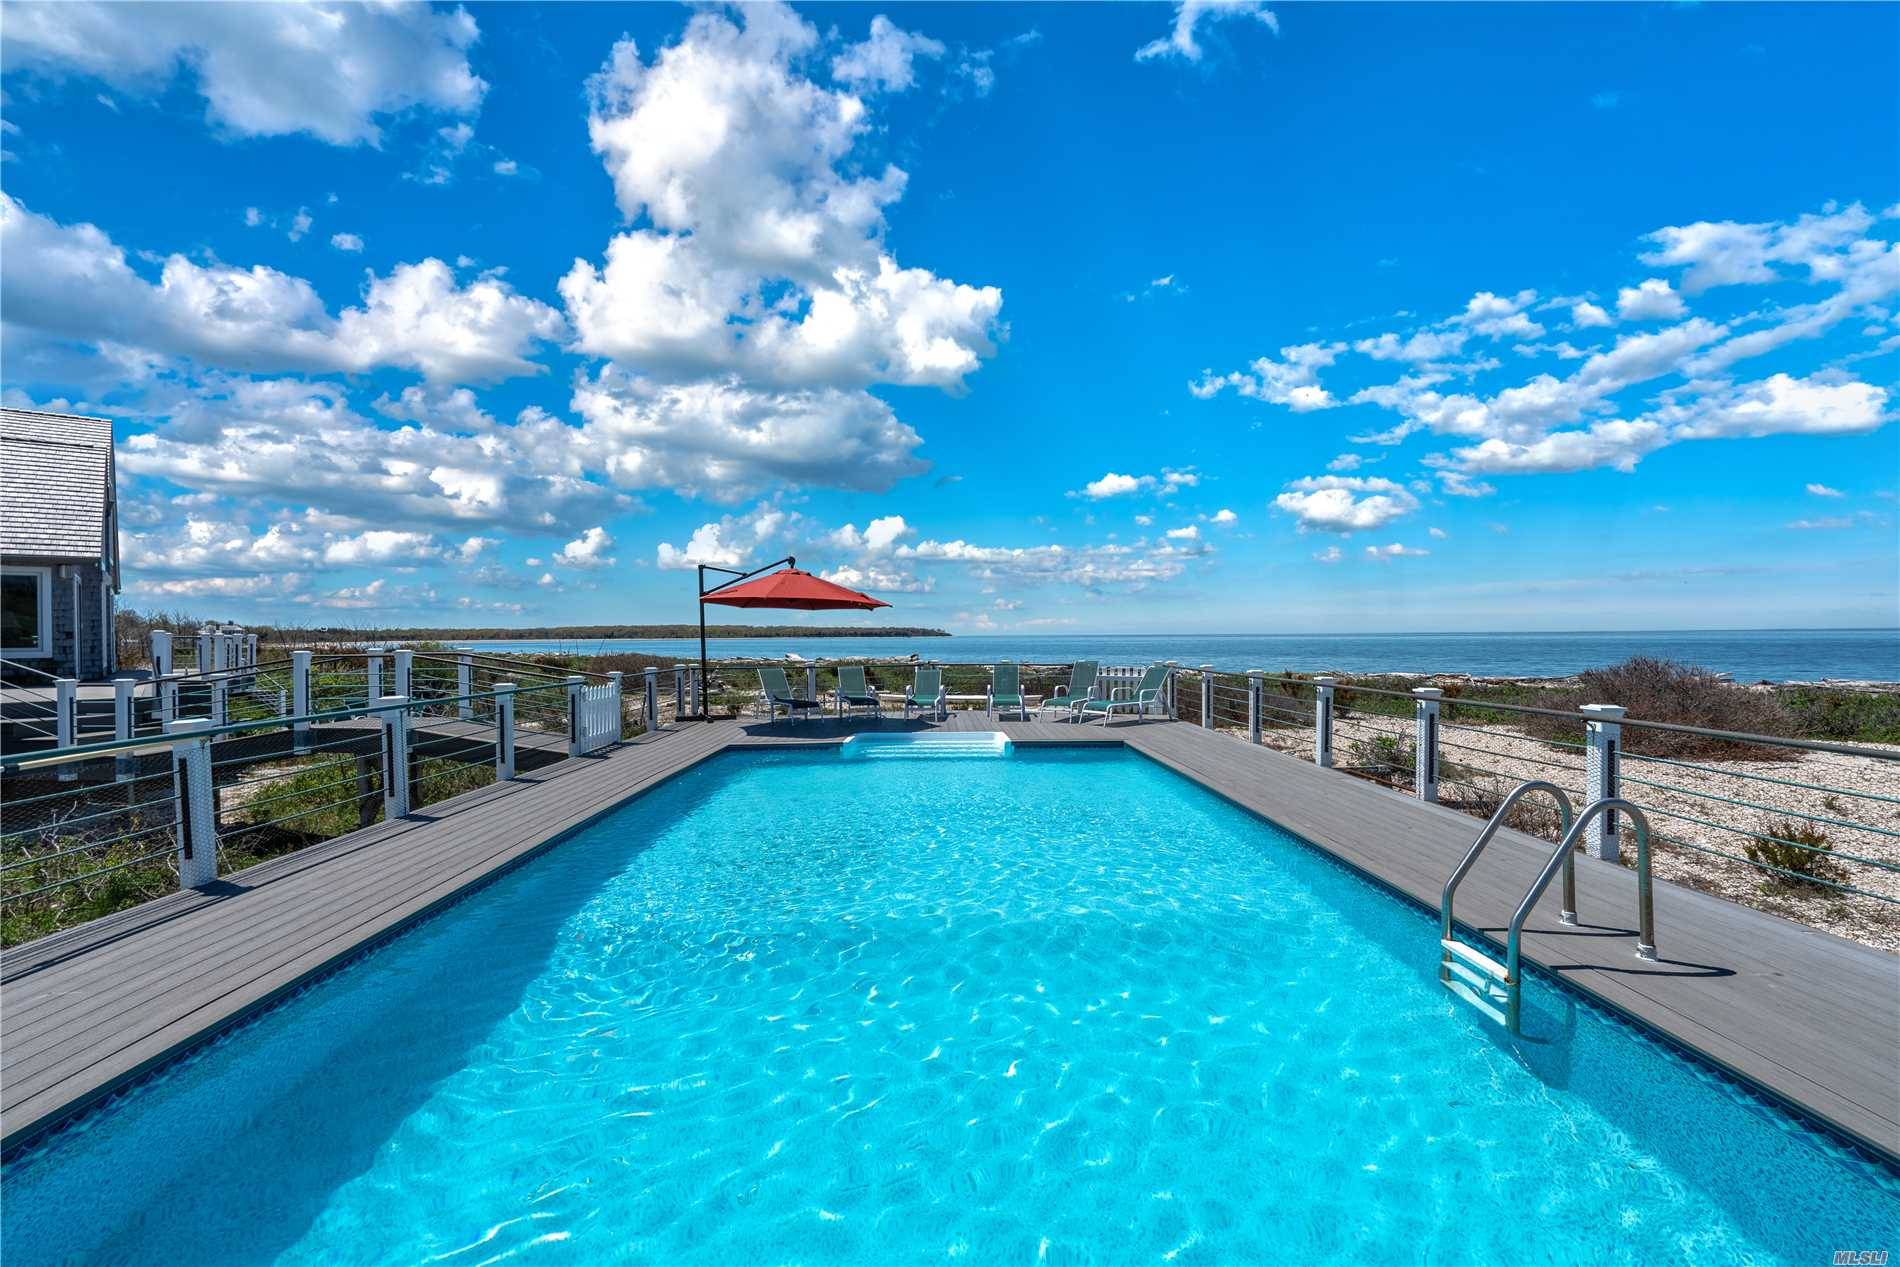 Uniquely situated on 3. 85 acres, sweeping views of the Long Island Sound the Great Peconic Bay can be seen from every room of this naturally light filled residence.